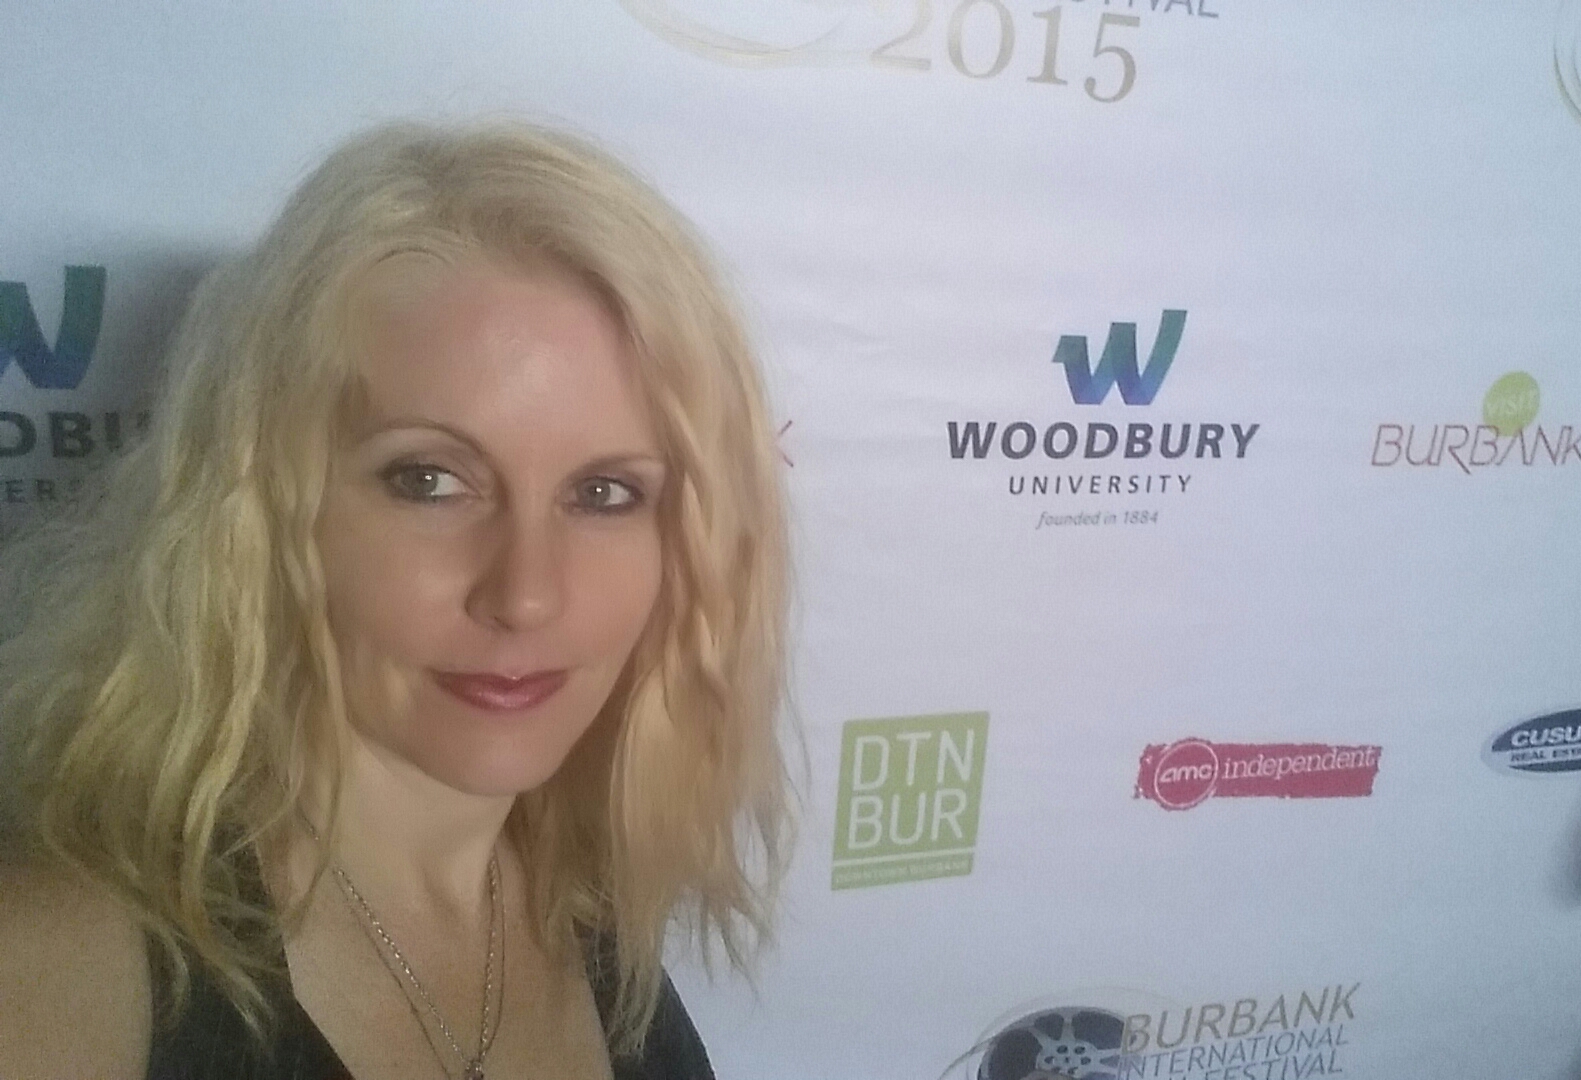 Assistant Director Amy Goodrich at the Sound Stage After party, 'Burbank International Film Festival' September 2015.